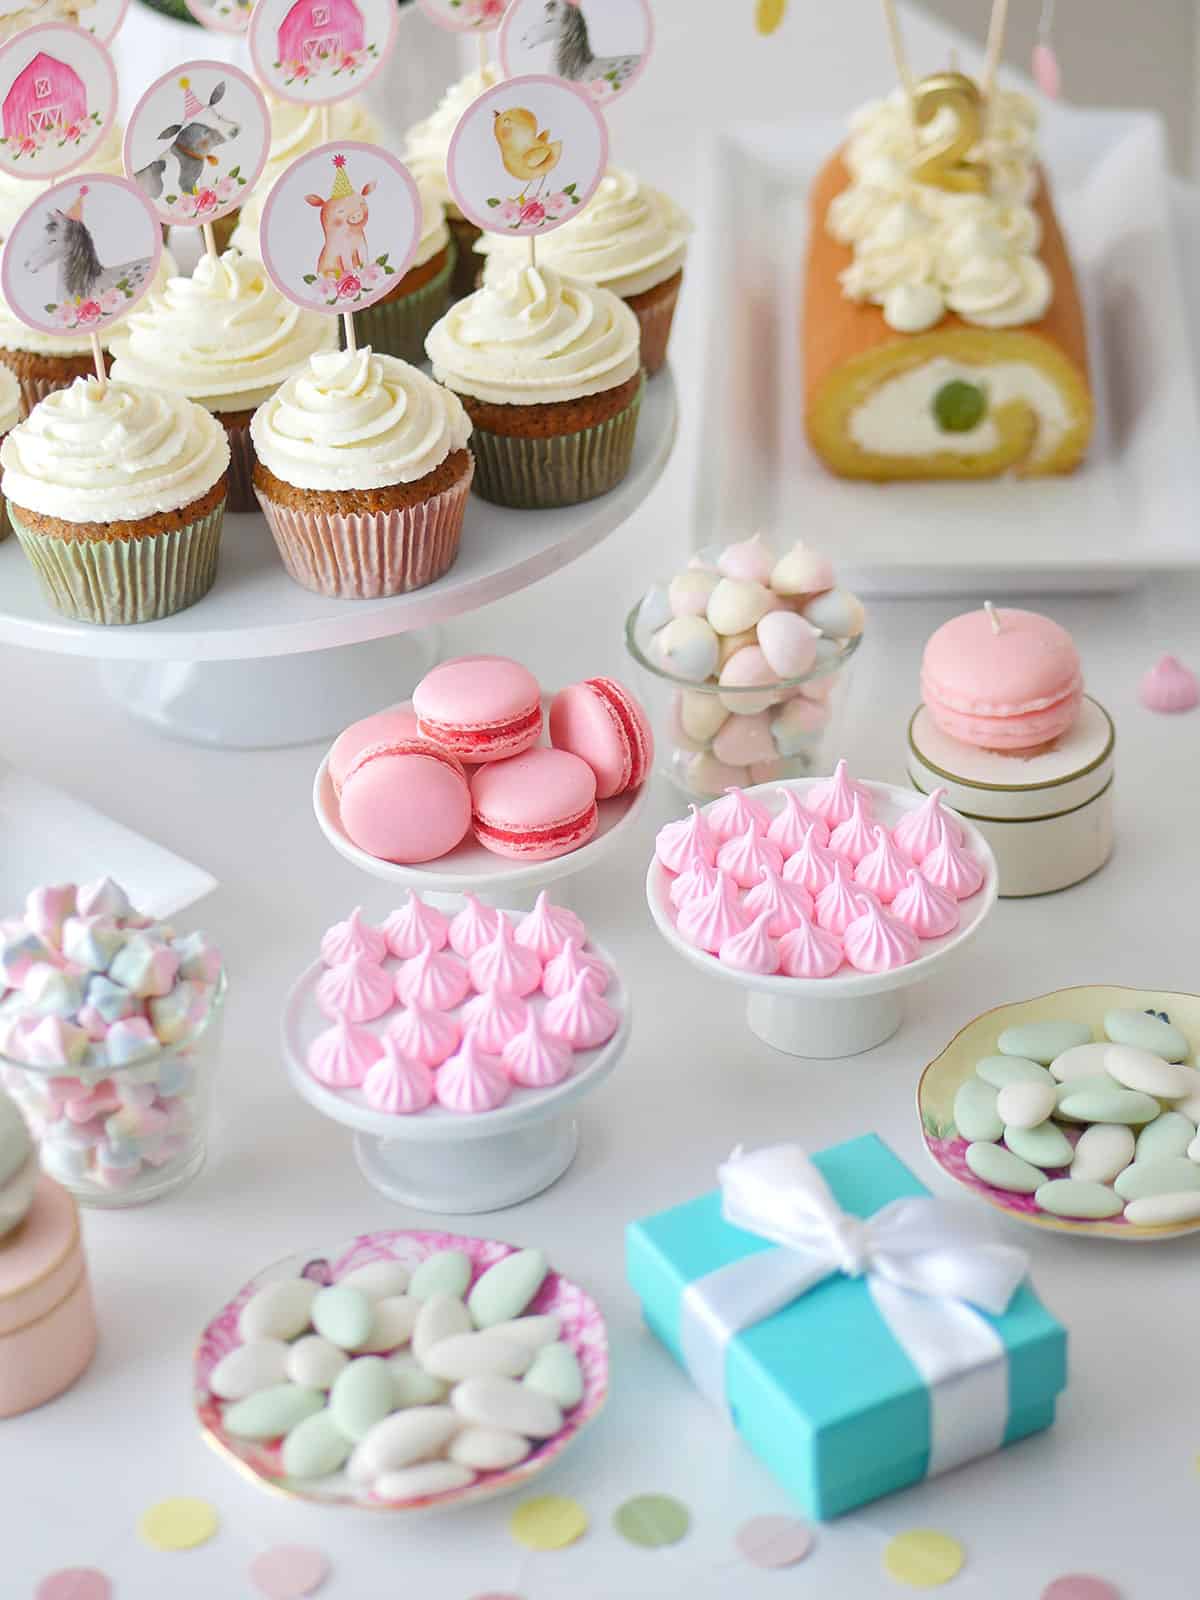 Pink meringue candy styled with other birthday treats like cupcakes and cake logs on a table. 